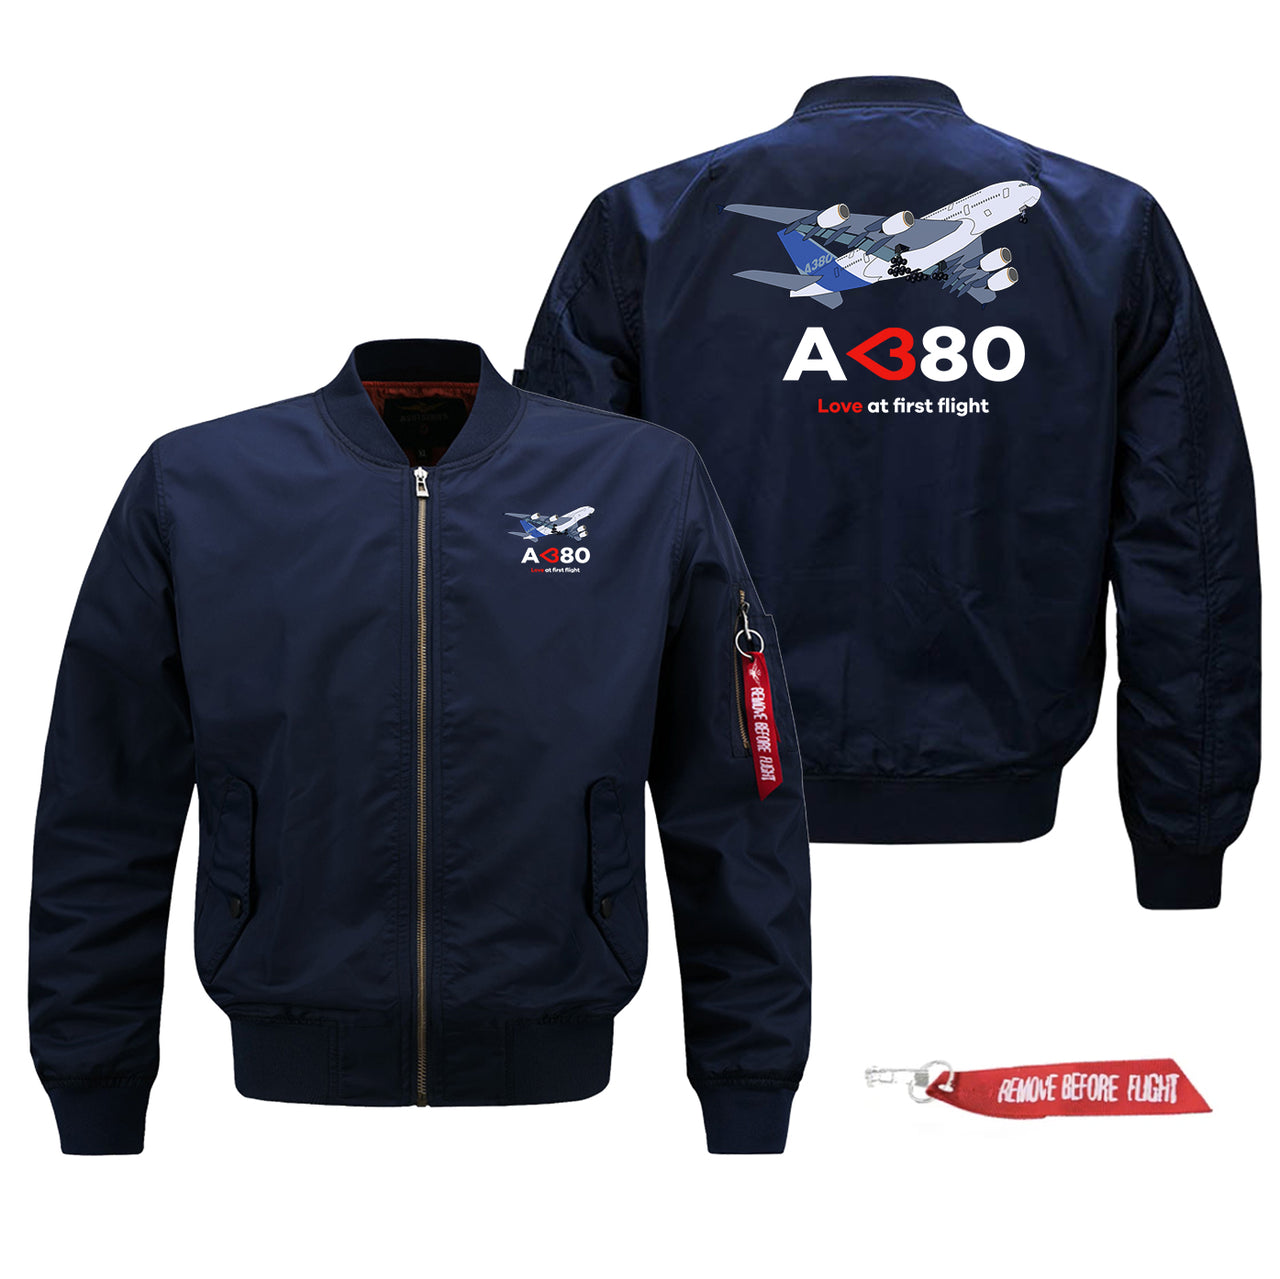 Airbus A380 Love at first flight Designed Pilot Jackets (Customizable)